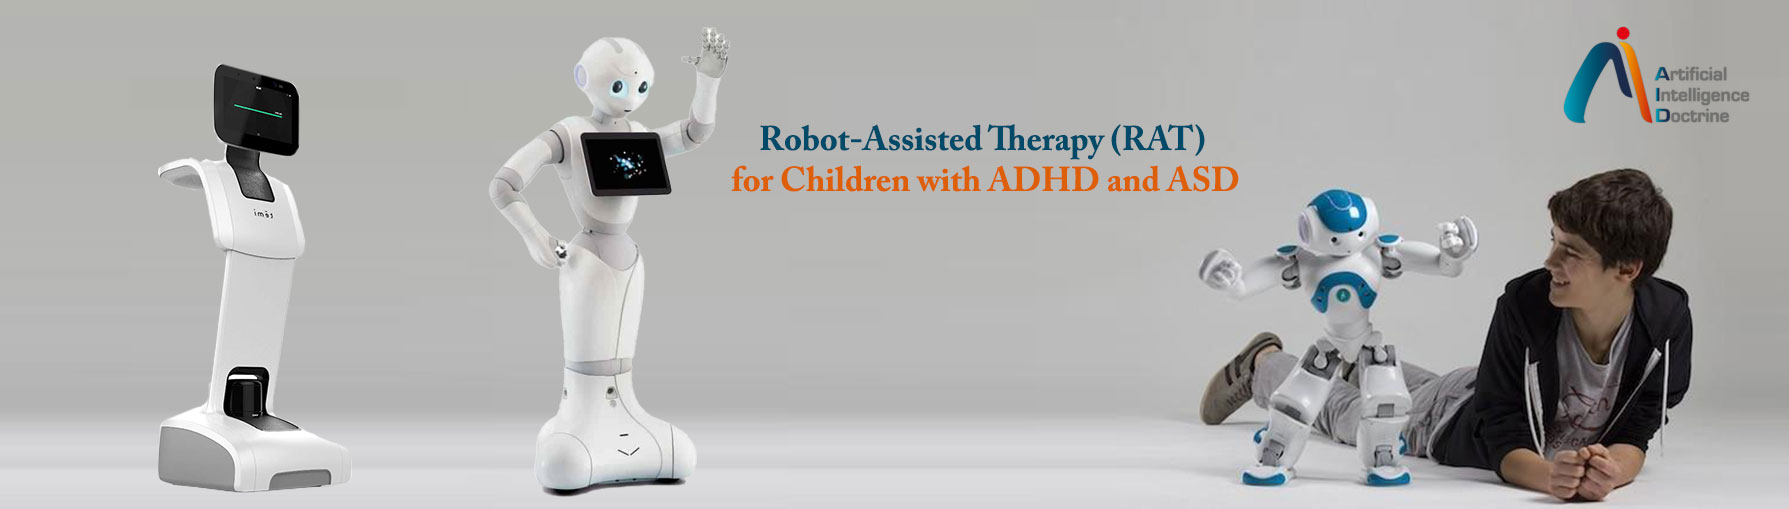 Robot Assisted Therapy (RAT) for Children with ADHD and ASD  